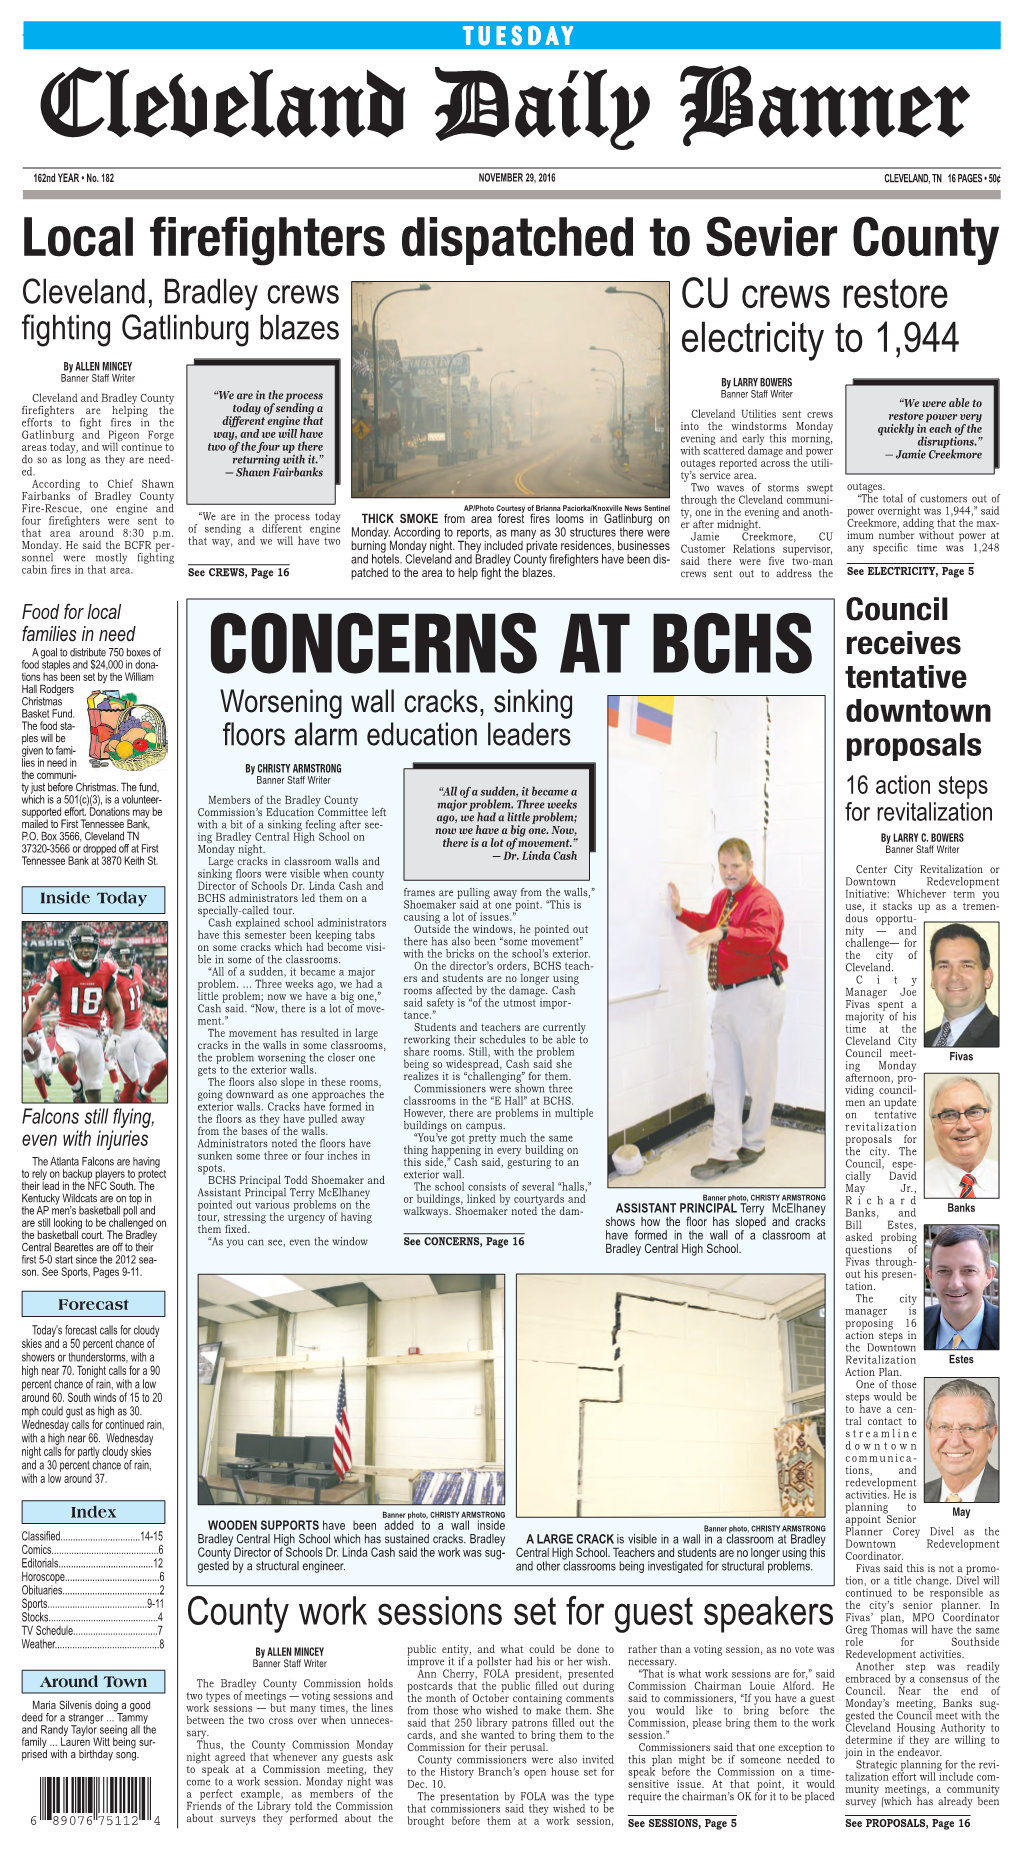 CONCERNS at BCHS Tions Has Been Set by the William Hall Rodgers Tentative Christmas Basket Fund